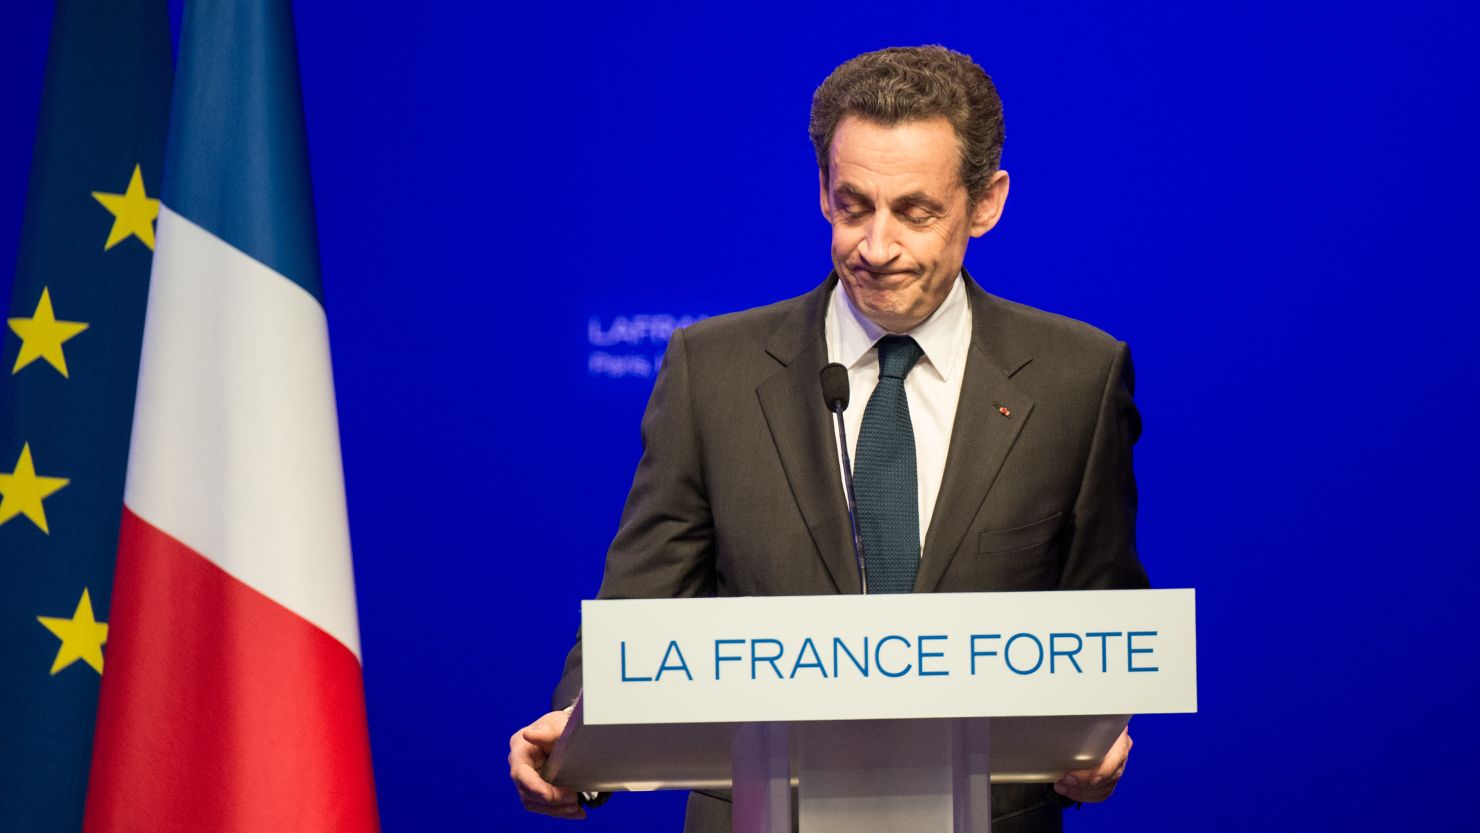 French President Nicolas Sarkozy played a world role that's unlikely to be followed by his successor, Francois Hollande.